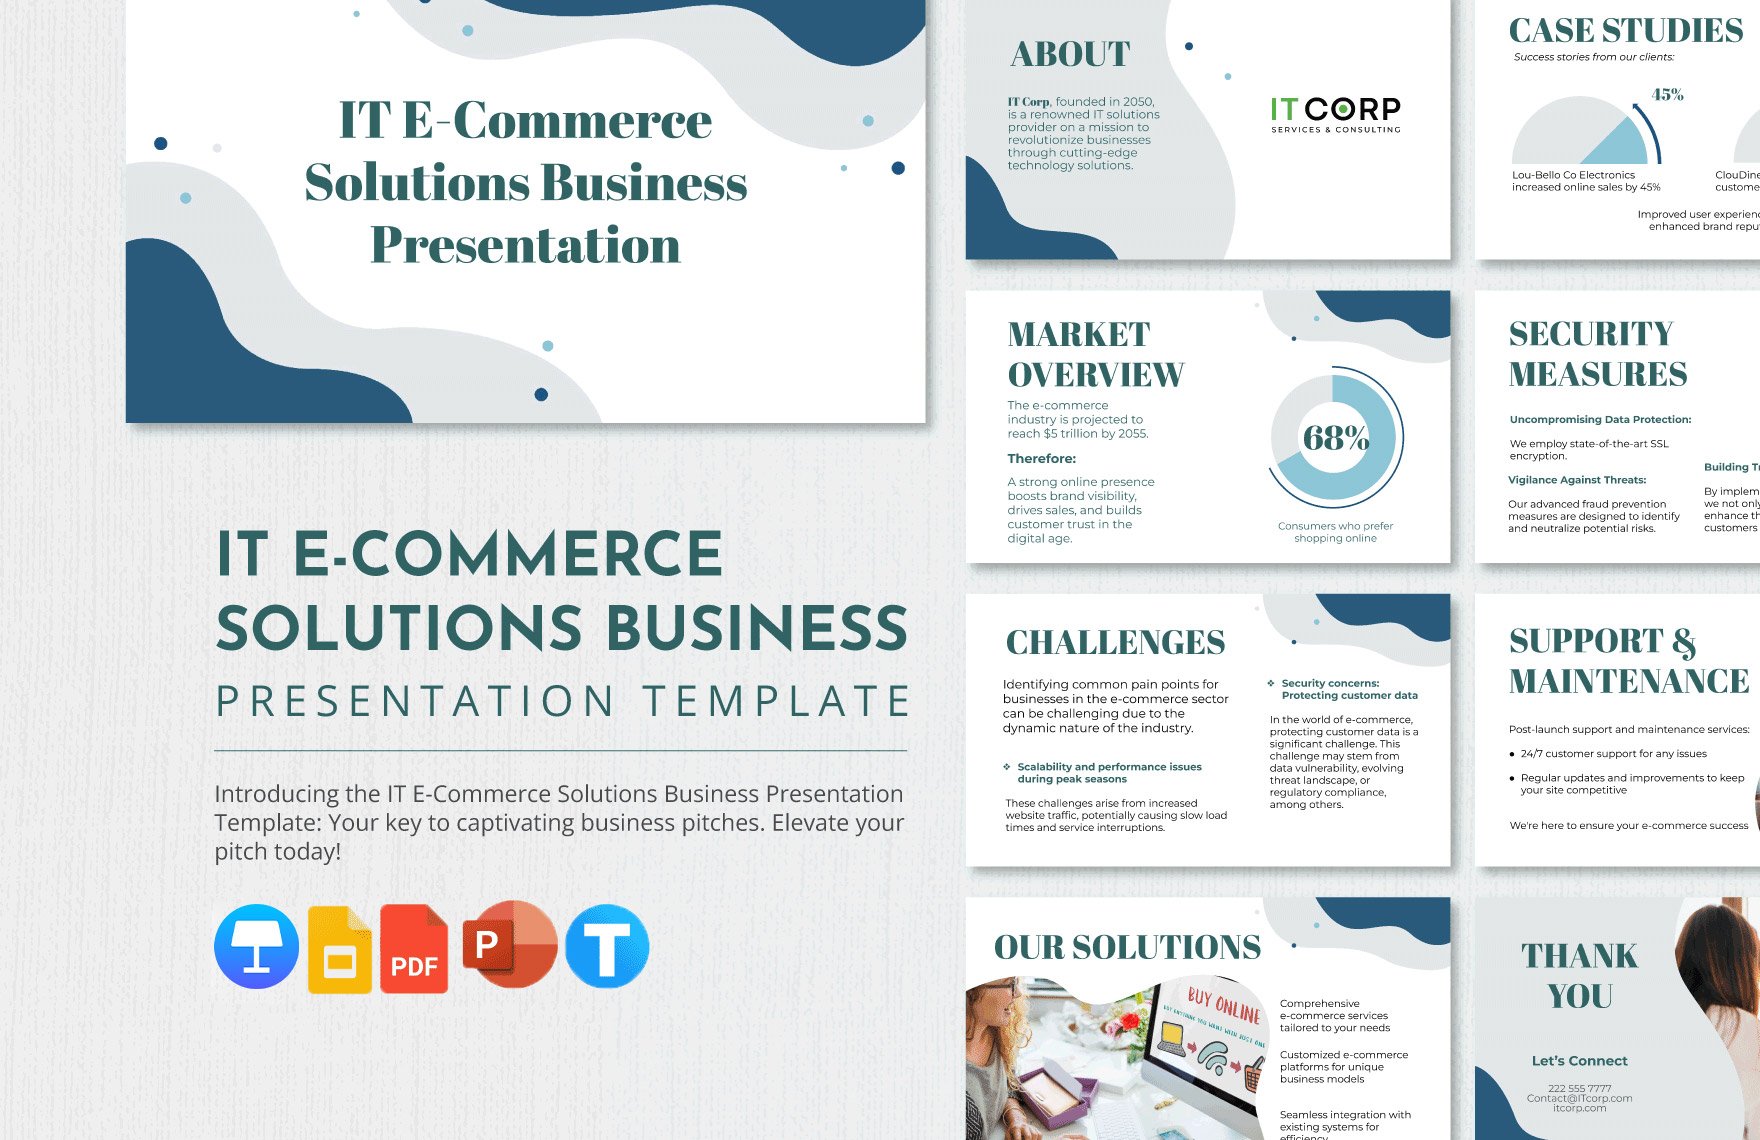 IT E-Commerce Solutions Business Presentation Template in PDF, PowerPoint, Google Slides, Apple Keynote